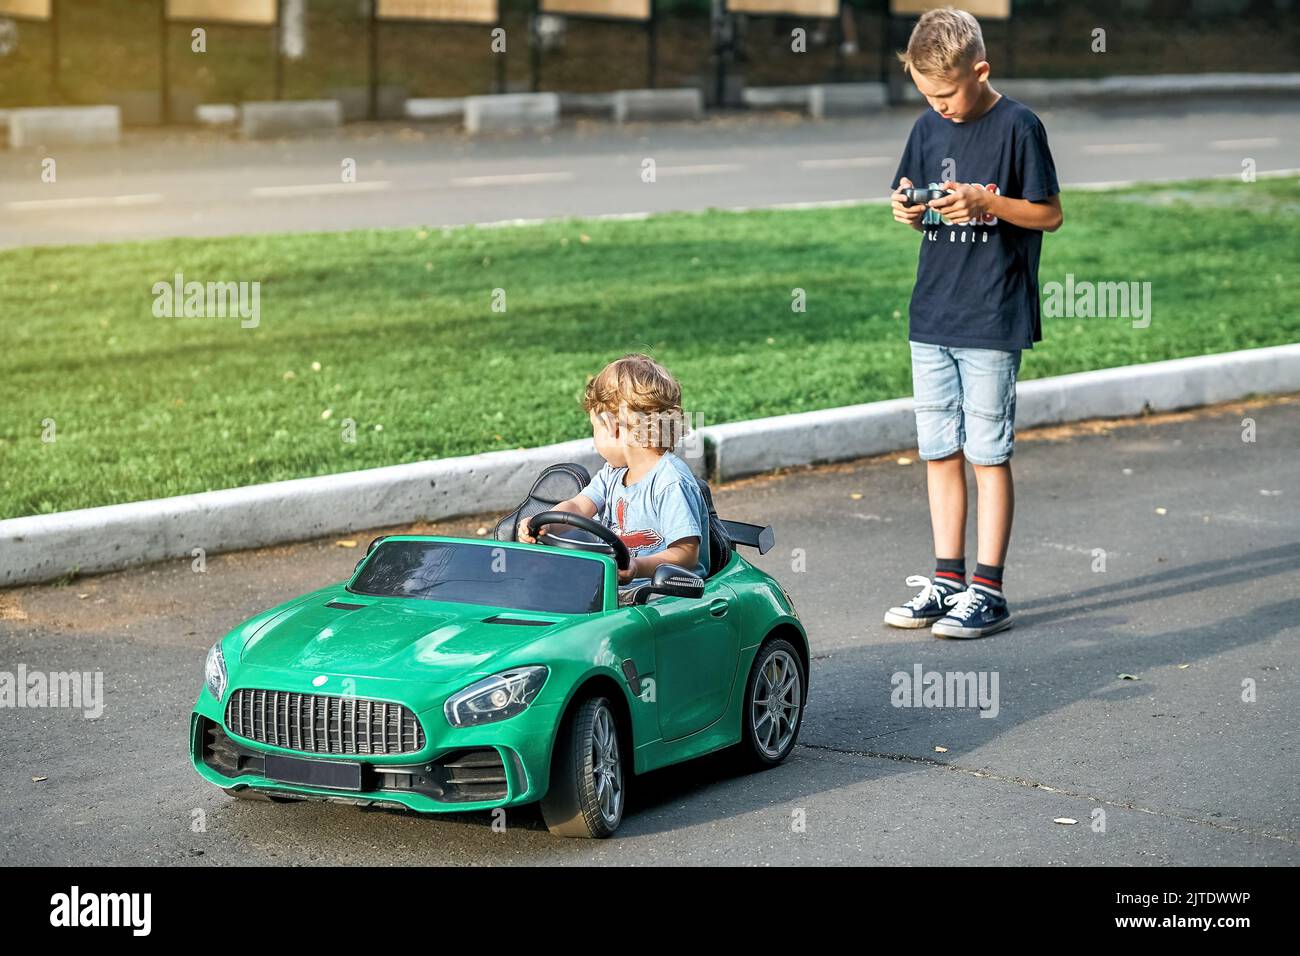 Elder brother controls children car with remote at walk with little brother in public park. Toddler boy sits in green car holding steering wheel Stock Photo